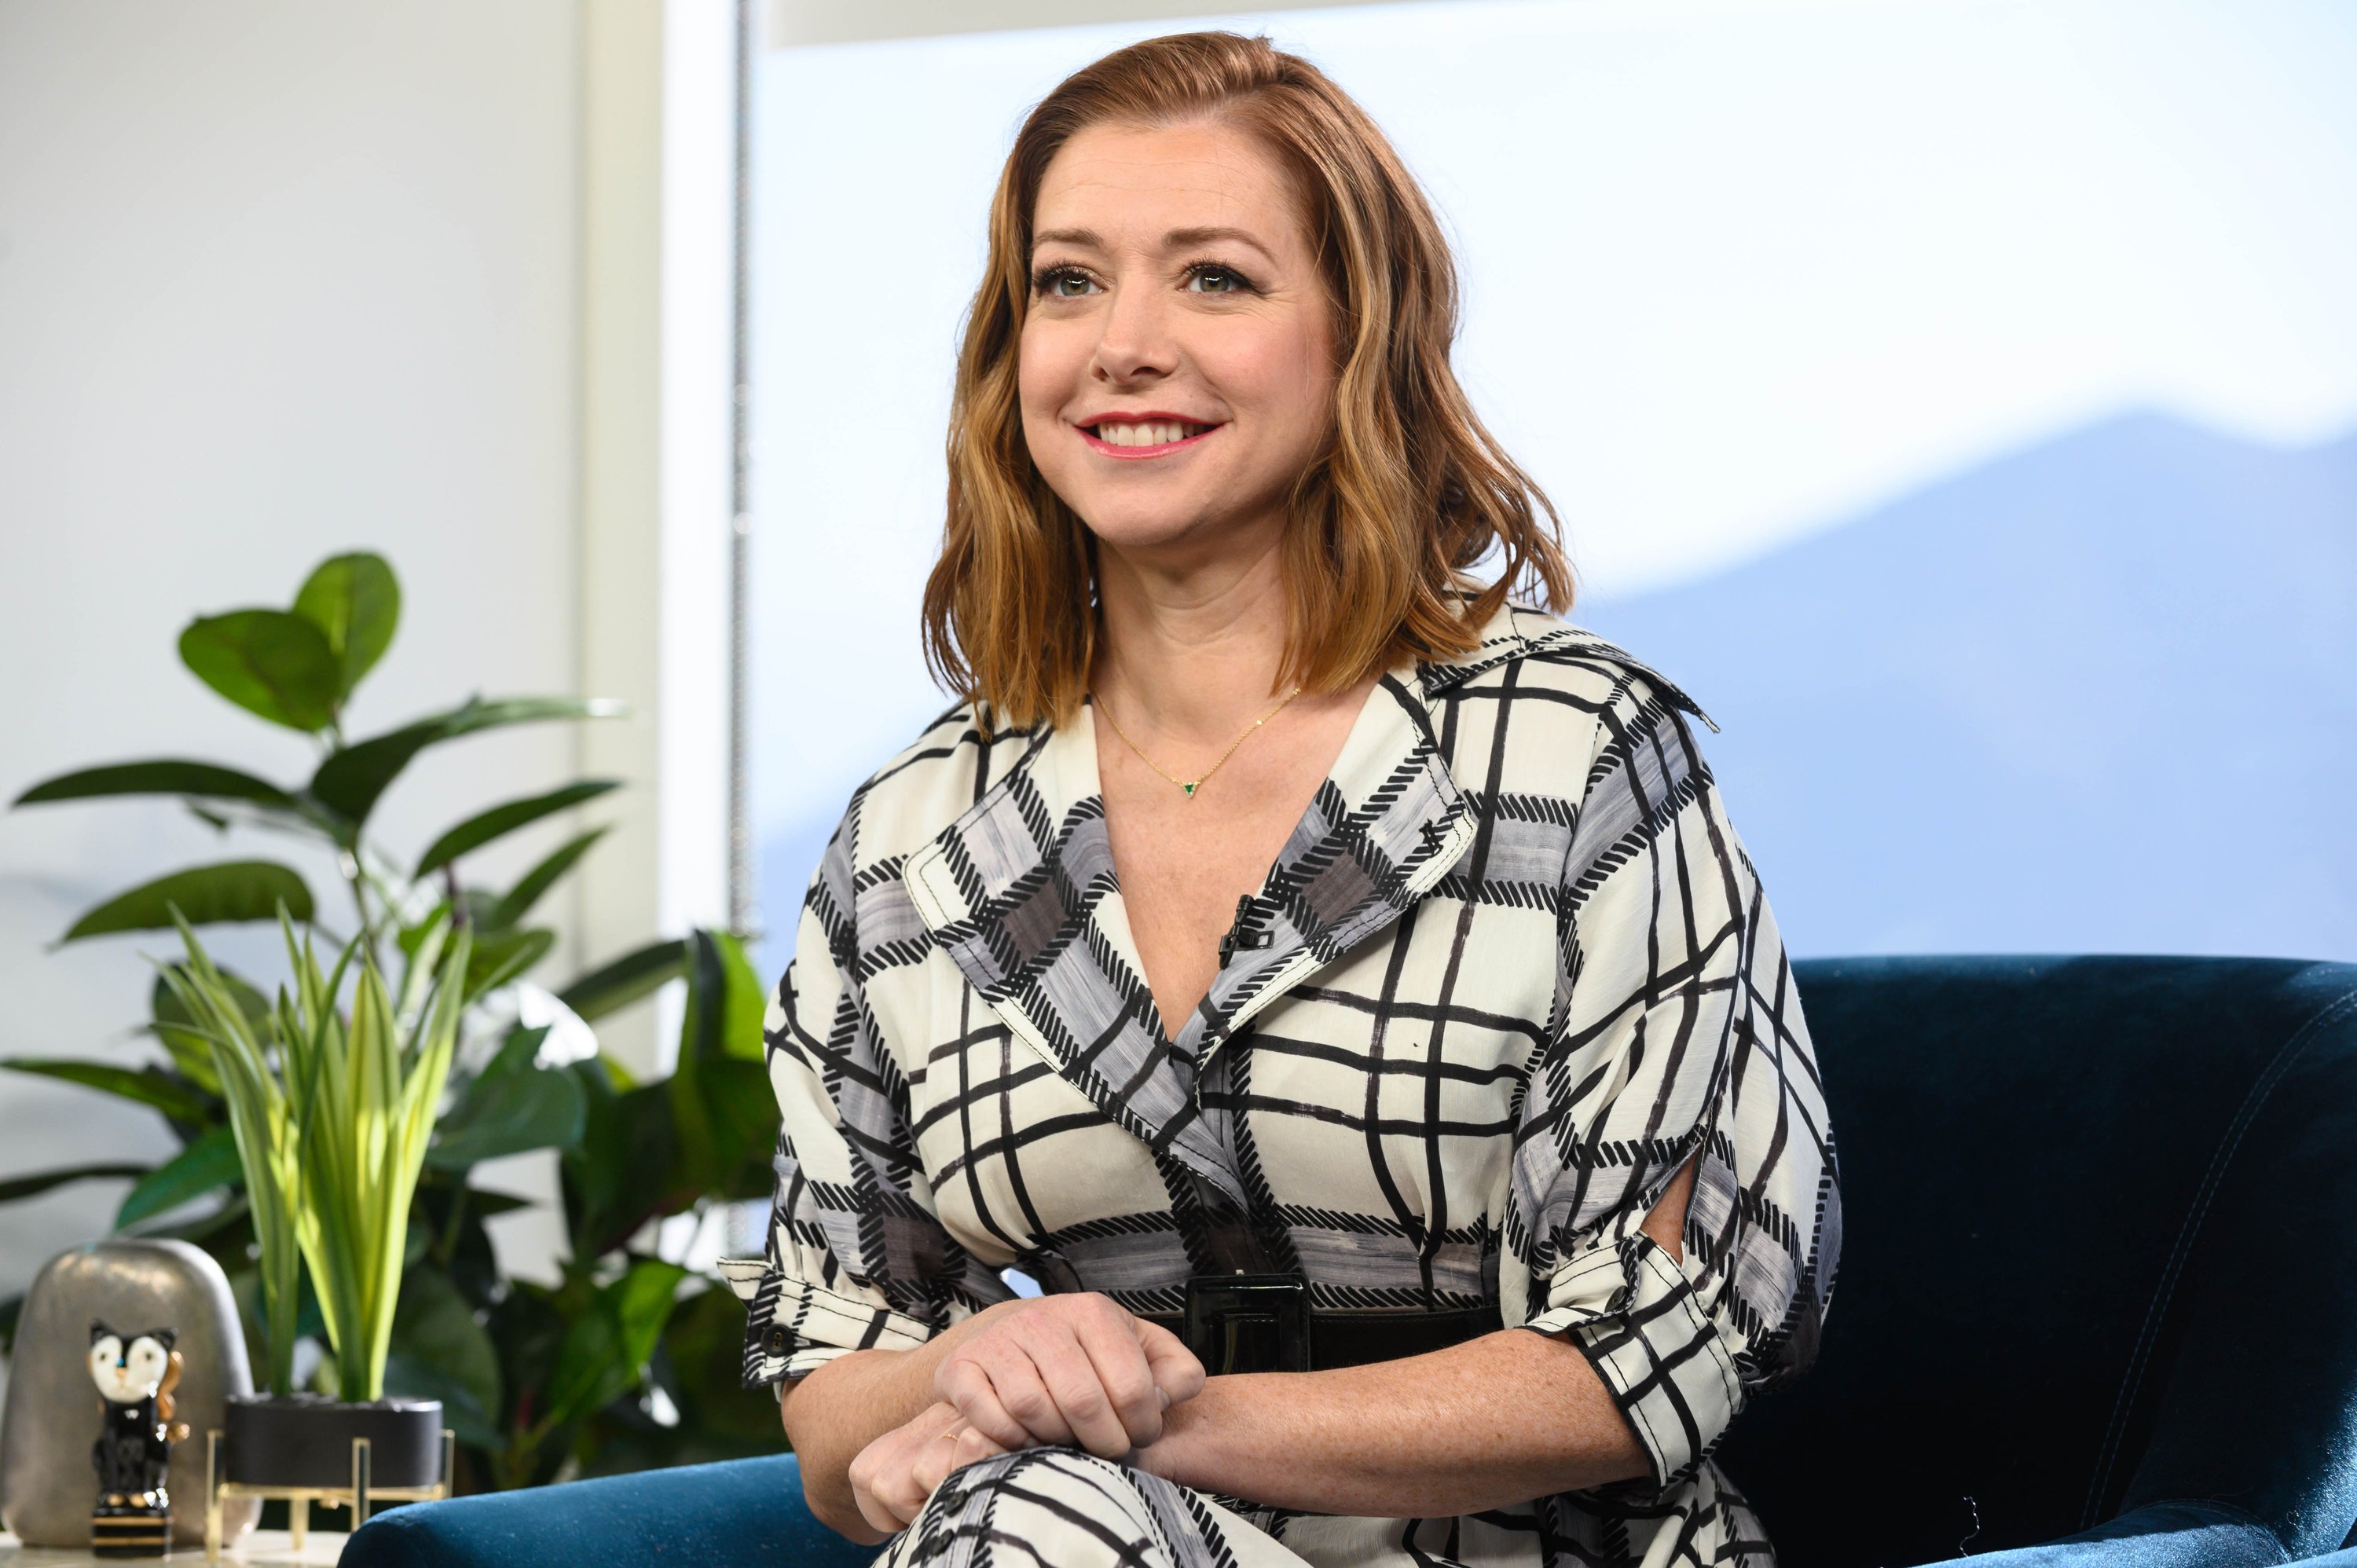 Actor Alyson Hannigan wears a black and white plaid dress. Hannigan's house was used to film scenes for 'This Is Us' Season 6.